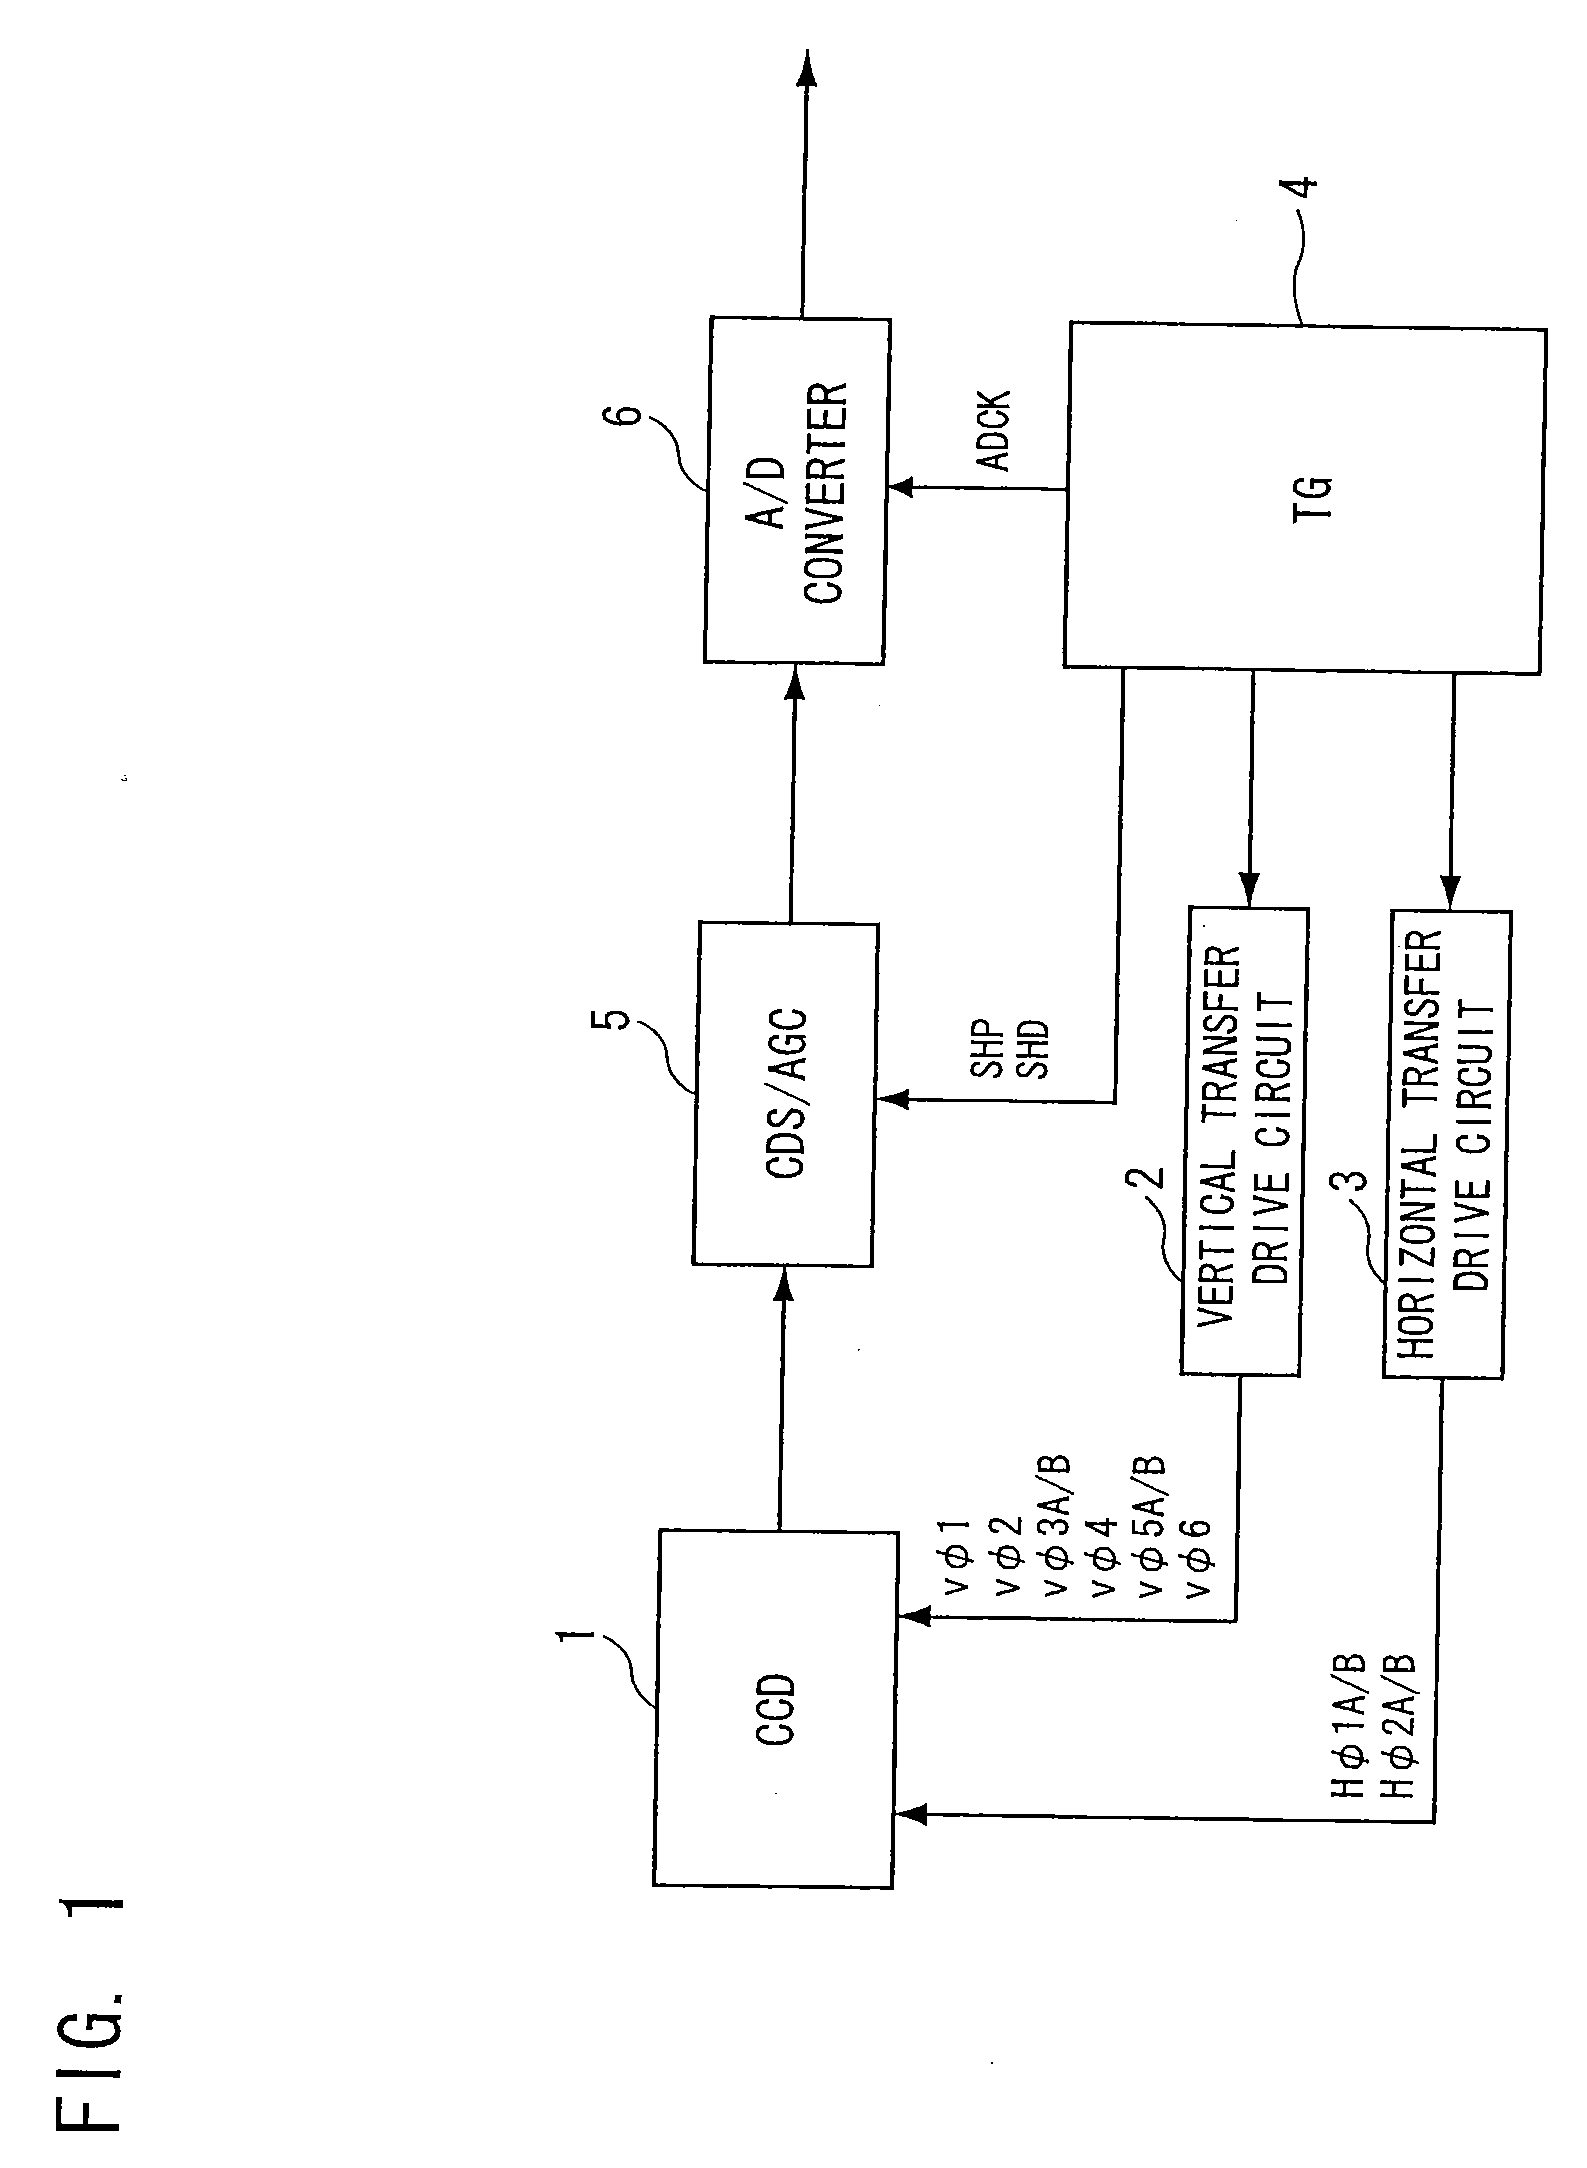 Driver for solid-state image sensing device